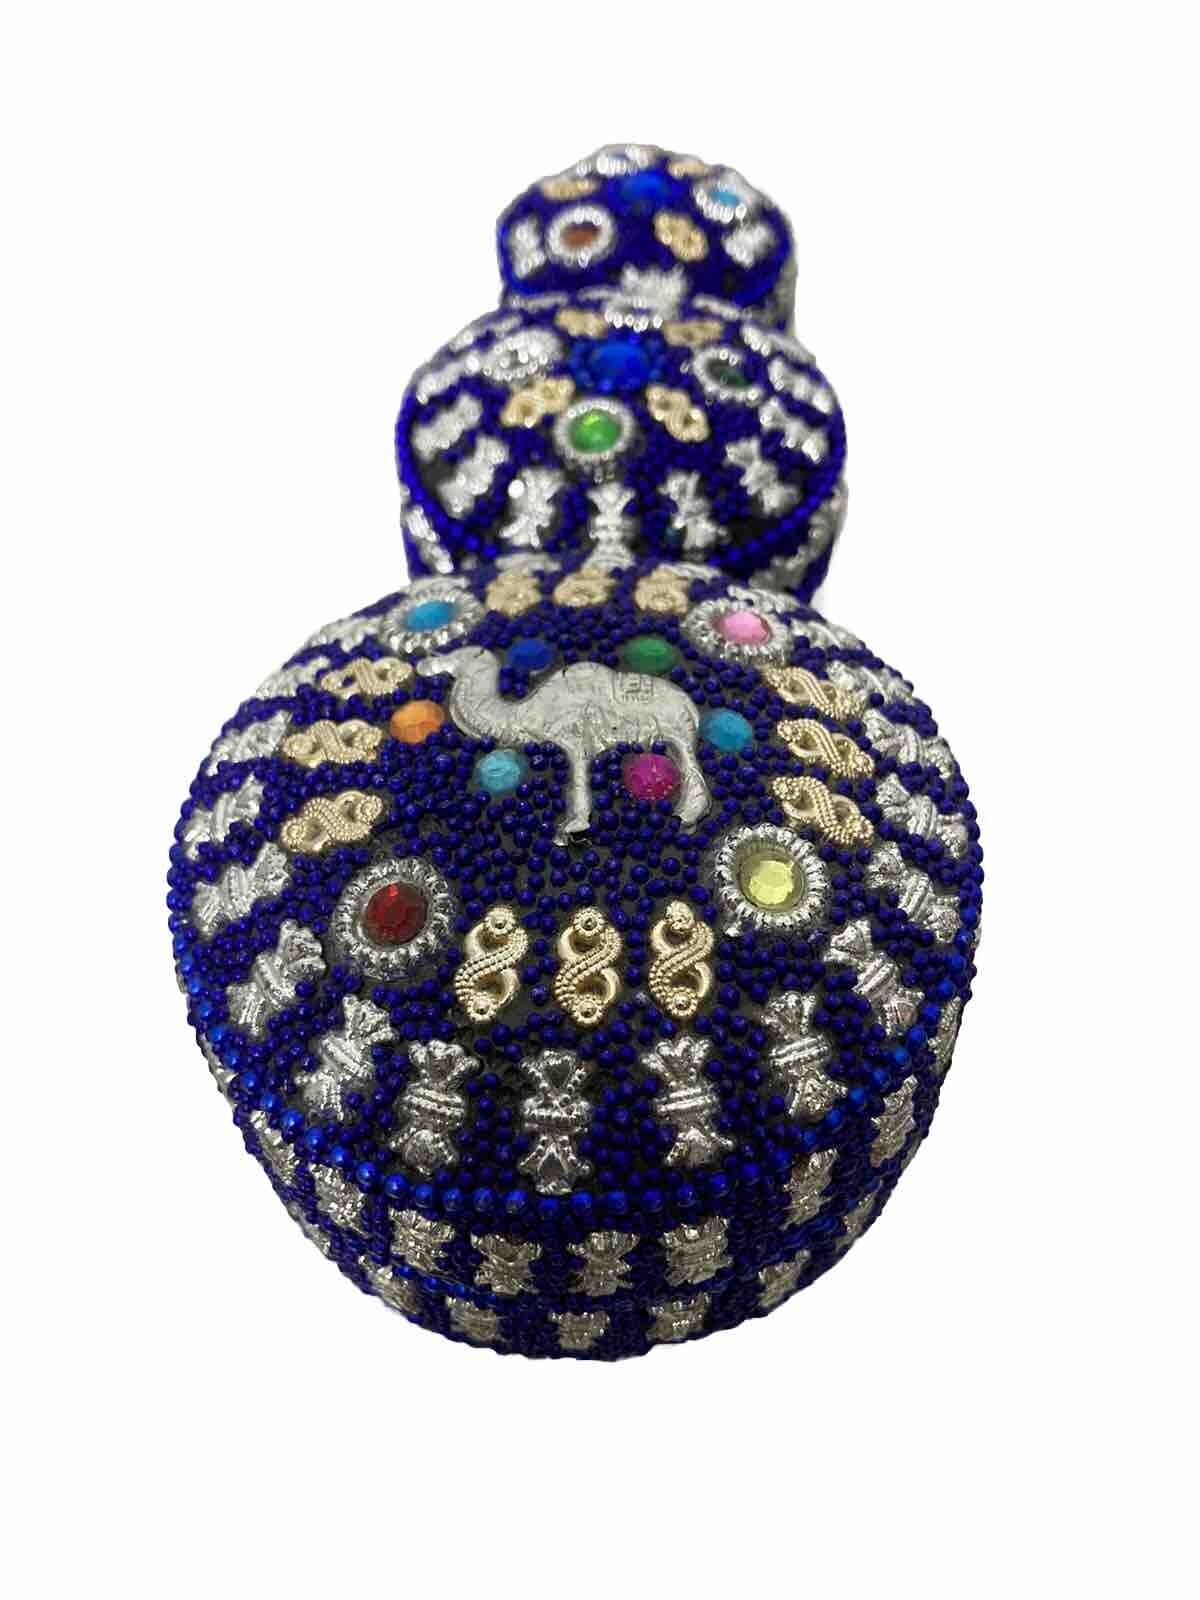 Vintage Hand Beaded Blue Trinket Boxes Camel Ring Seed beads Handmade Unique